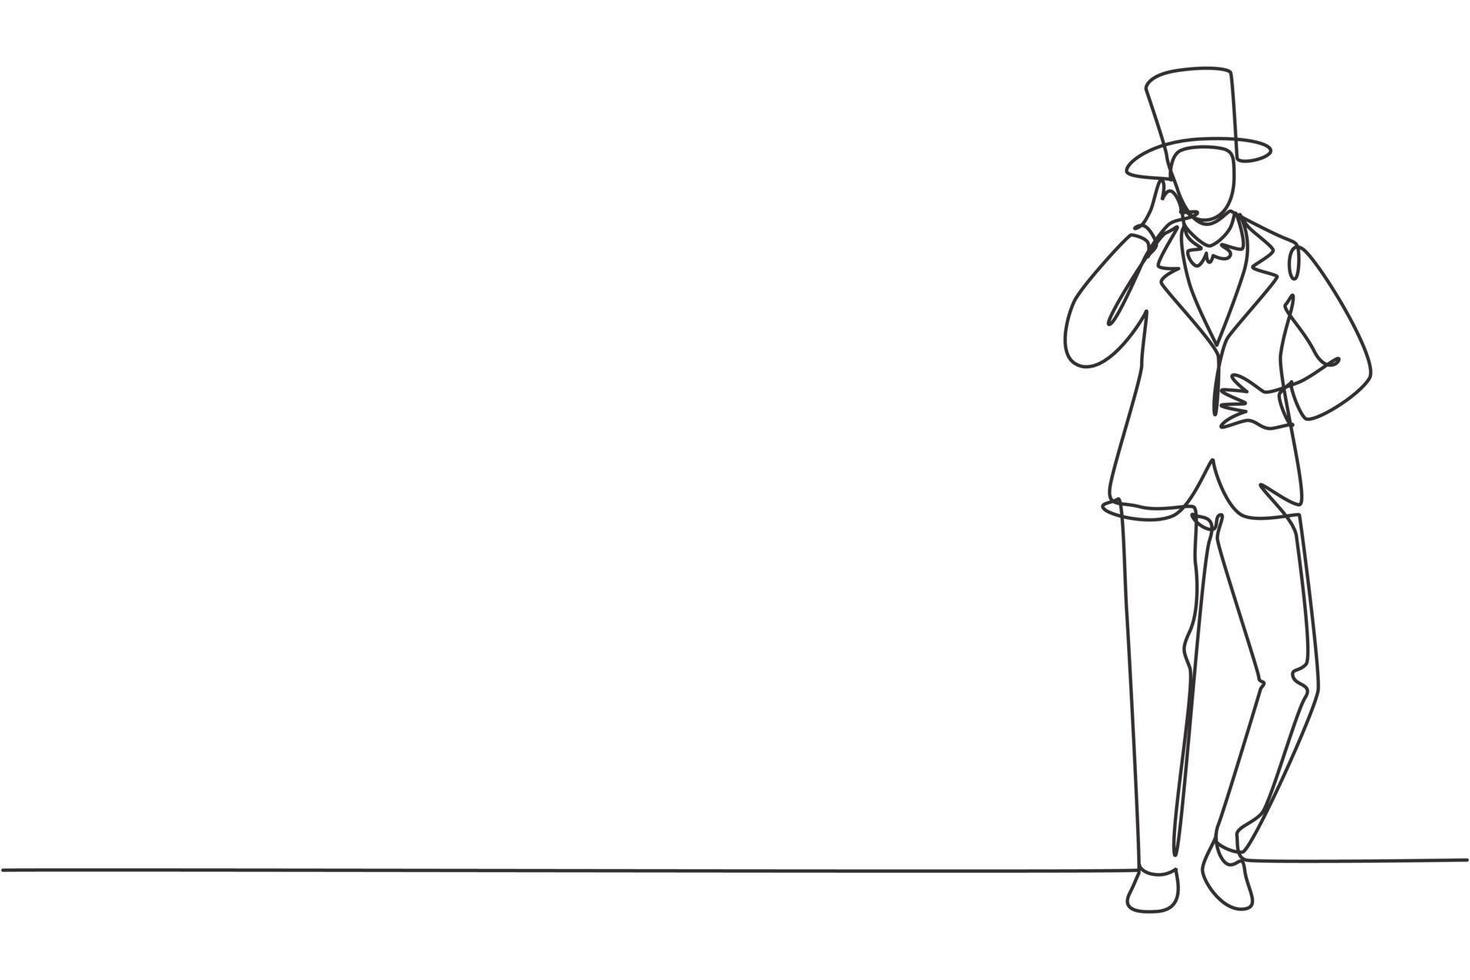 Continuous one line drawing magician stands with call me gesture wearing hat and holding magic wand performing tricks at circus show. Success show. Single line draw design vector graphic illustration